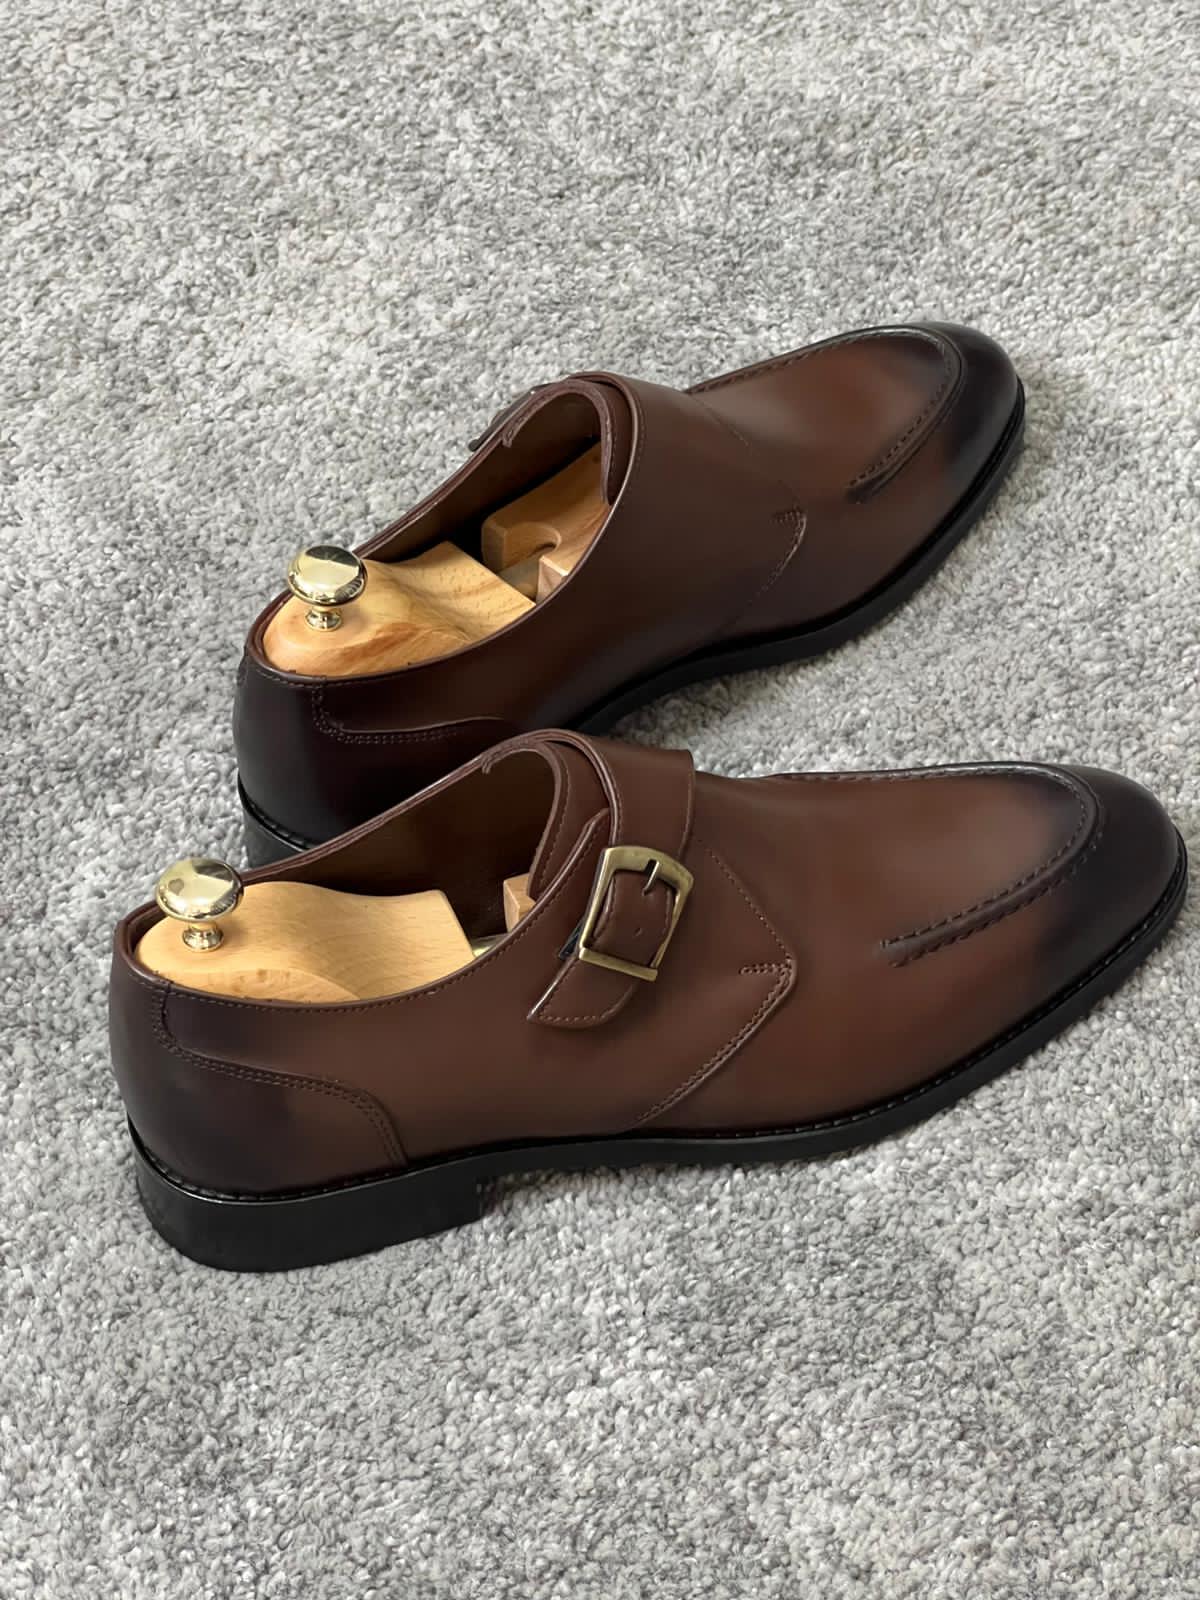 Classic Brown Buckled Shoe